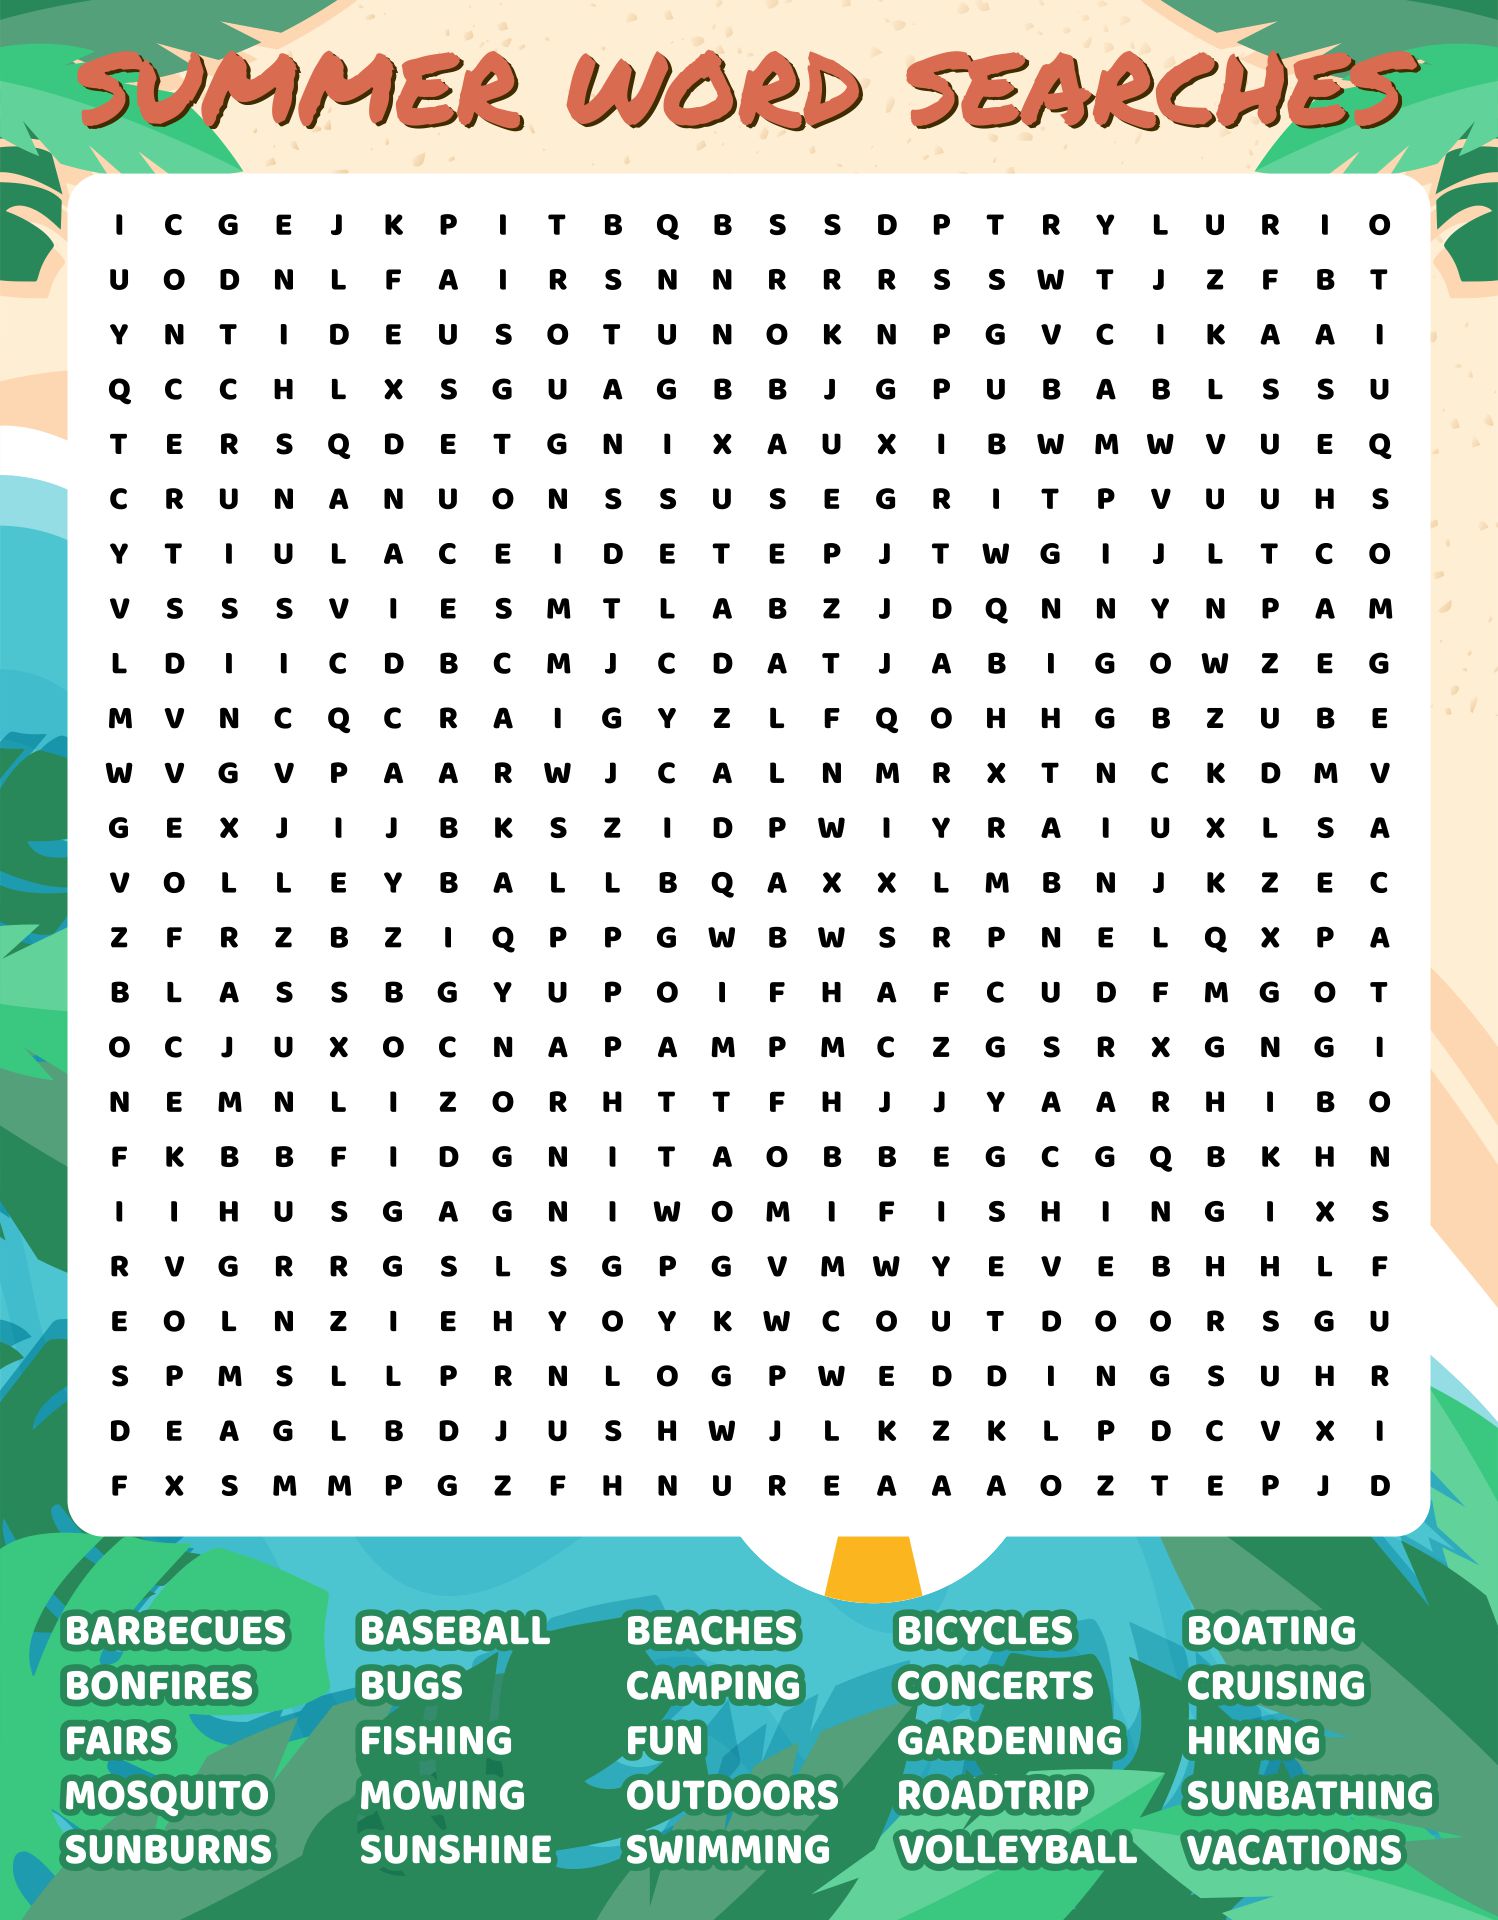 Summer Word Searches to Print